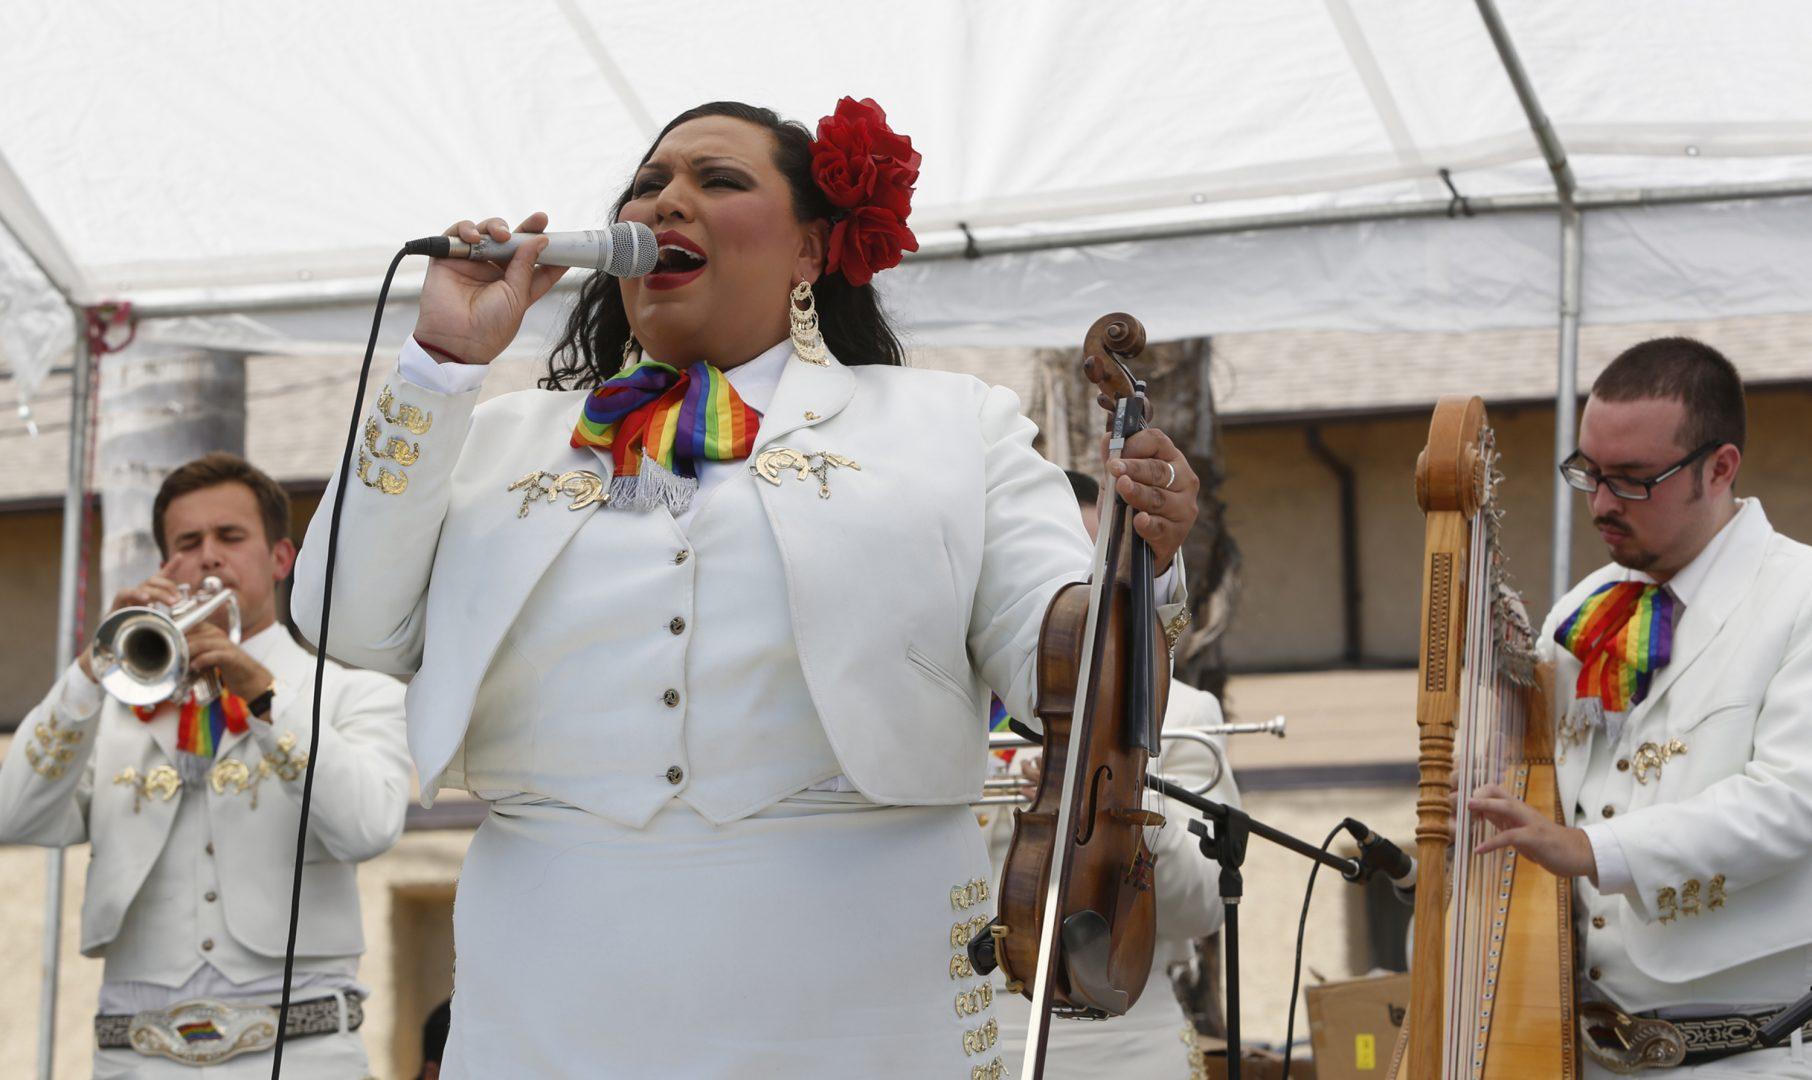 Natalia Melendez, center, who is believed to be the first openly transgender female mariachi performer, sings with Mariachi Arcoiris (Rainbow Mariachi) during a performance at a San Fernando LGBT Center event in San Fernando, Calif., on Aug. 15, 2015. (Anne Cusack/Los Angeles Times/TNS)